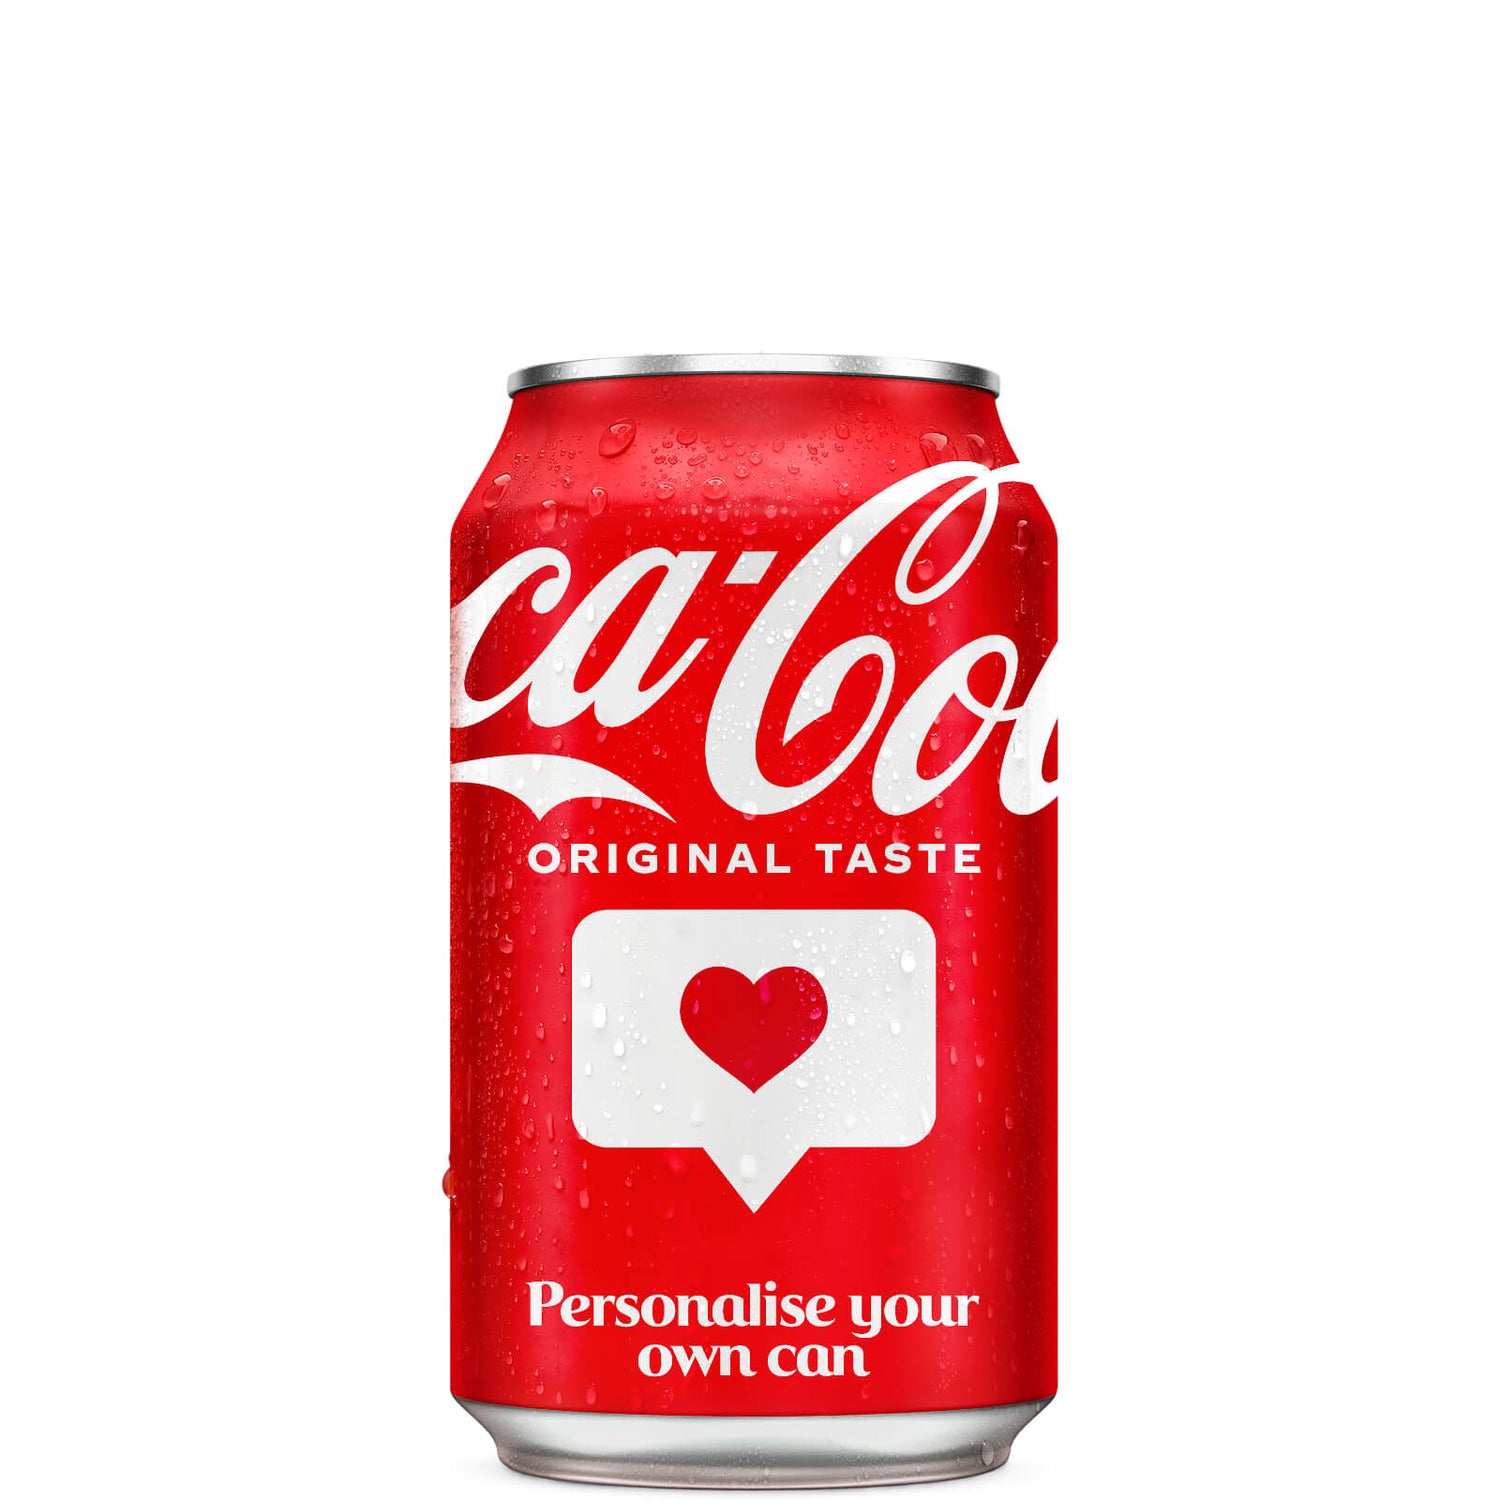 Coca-Cola Original Taste 330ml - Personalised Can - Thank You